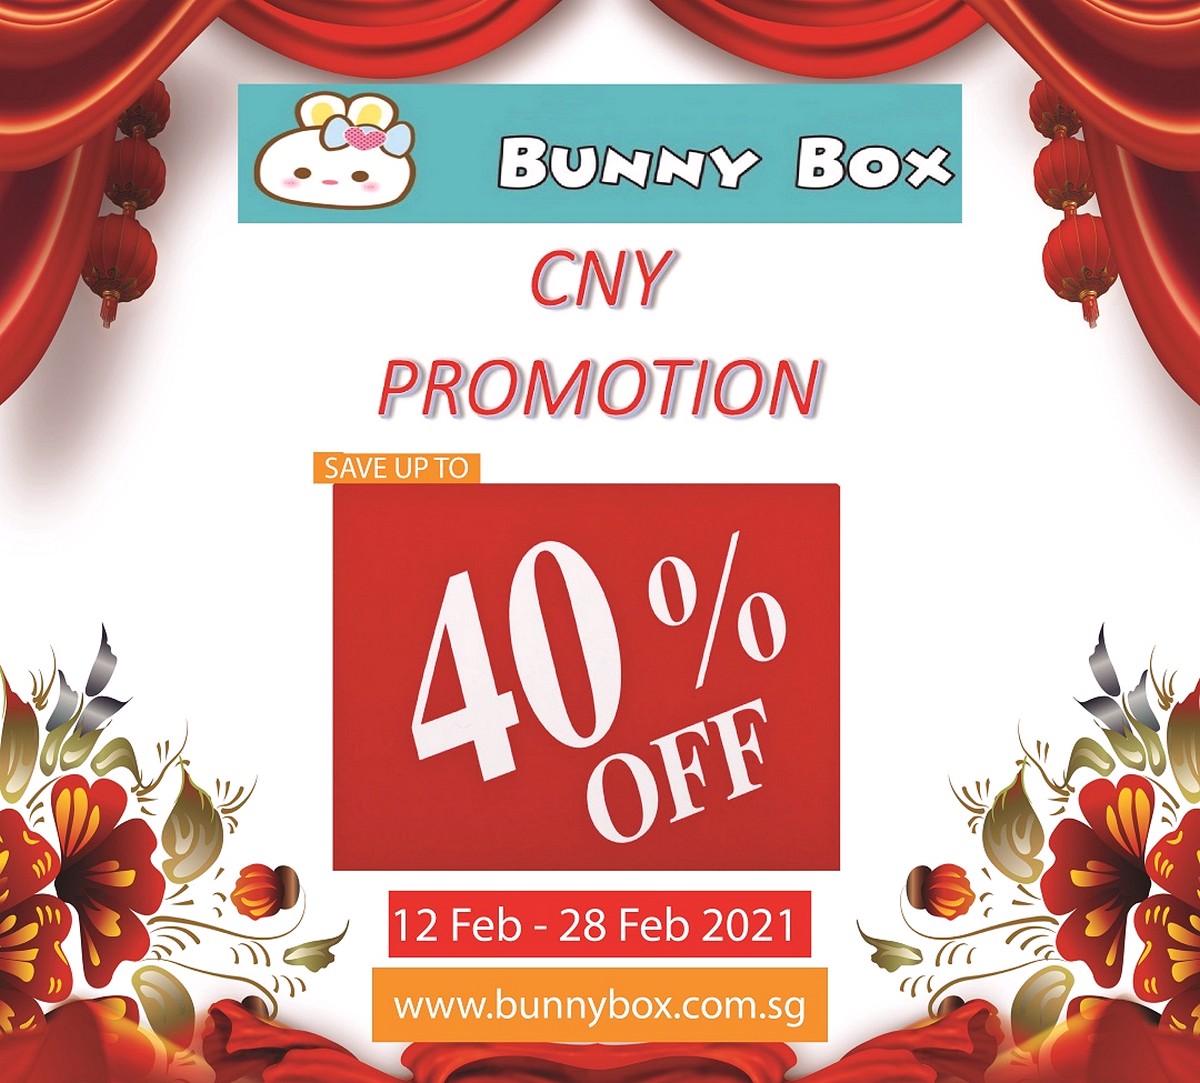 CNY-Poster 12-28 Feb 2021: Bunny Box CNY Promotion Sale Up to 40% OFF LEGO, Nerf, Play-Doh, Transformers, Paw Patrol, Bakugan, Hatchimals, Monster Jam, My Little Pony, Twisty Petz, Kinetic Sand & More